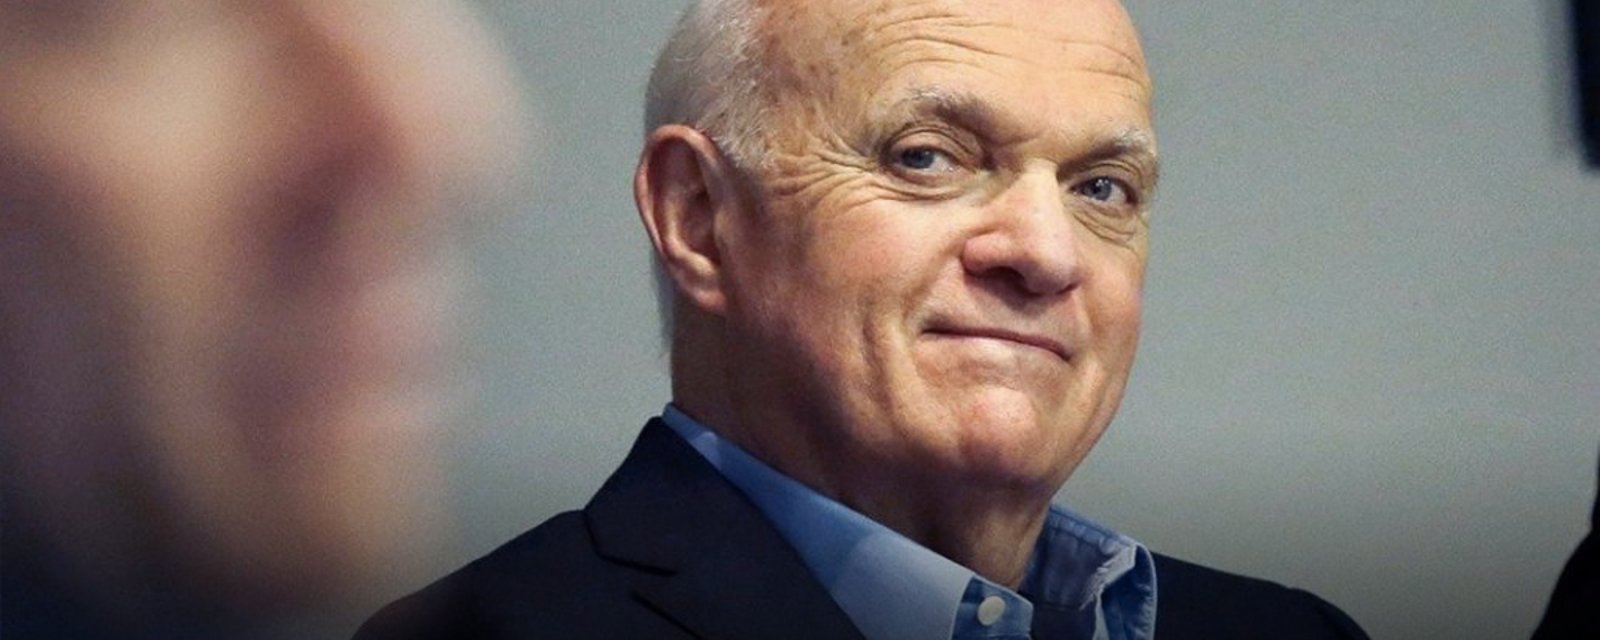 Rumor: Major hint that Lamoriello will be replaced as GM